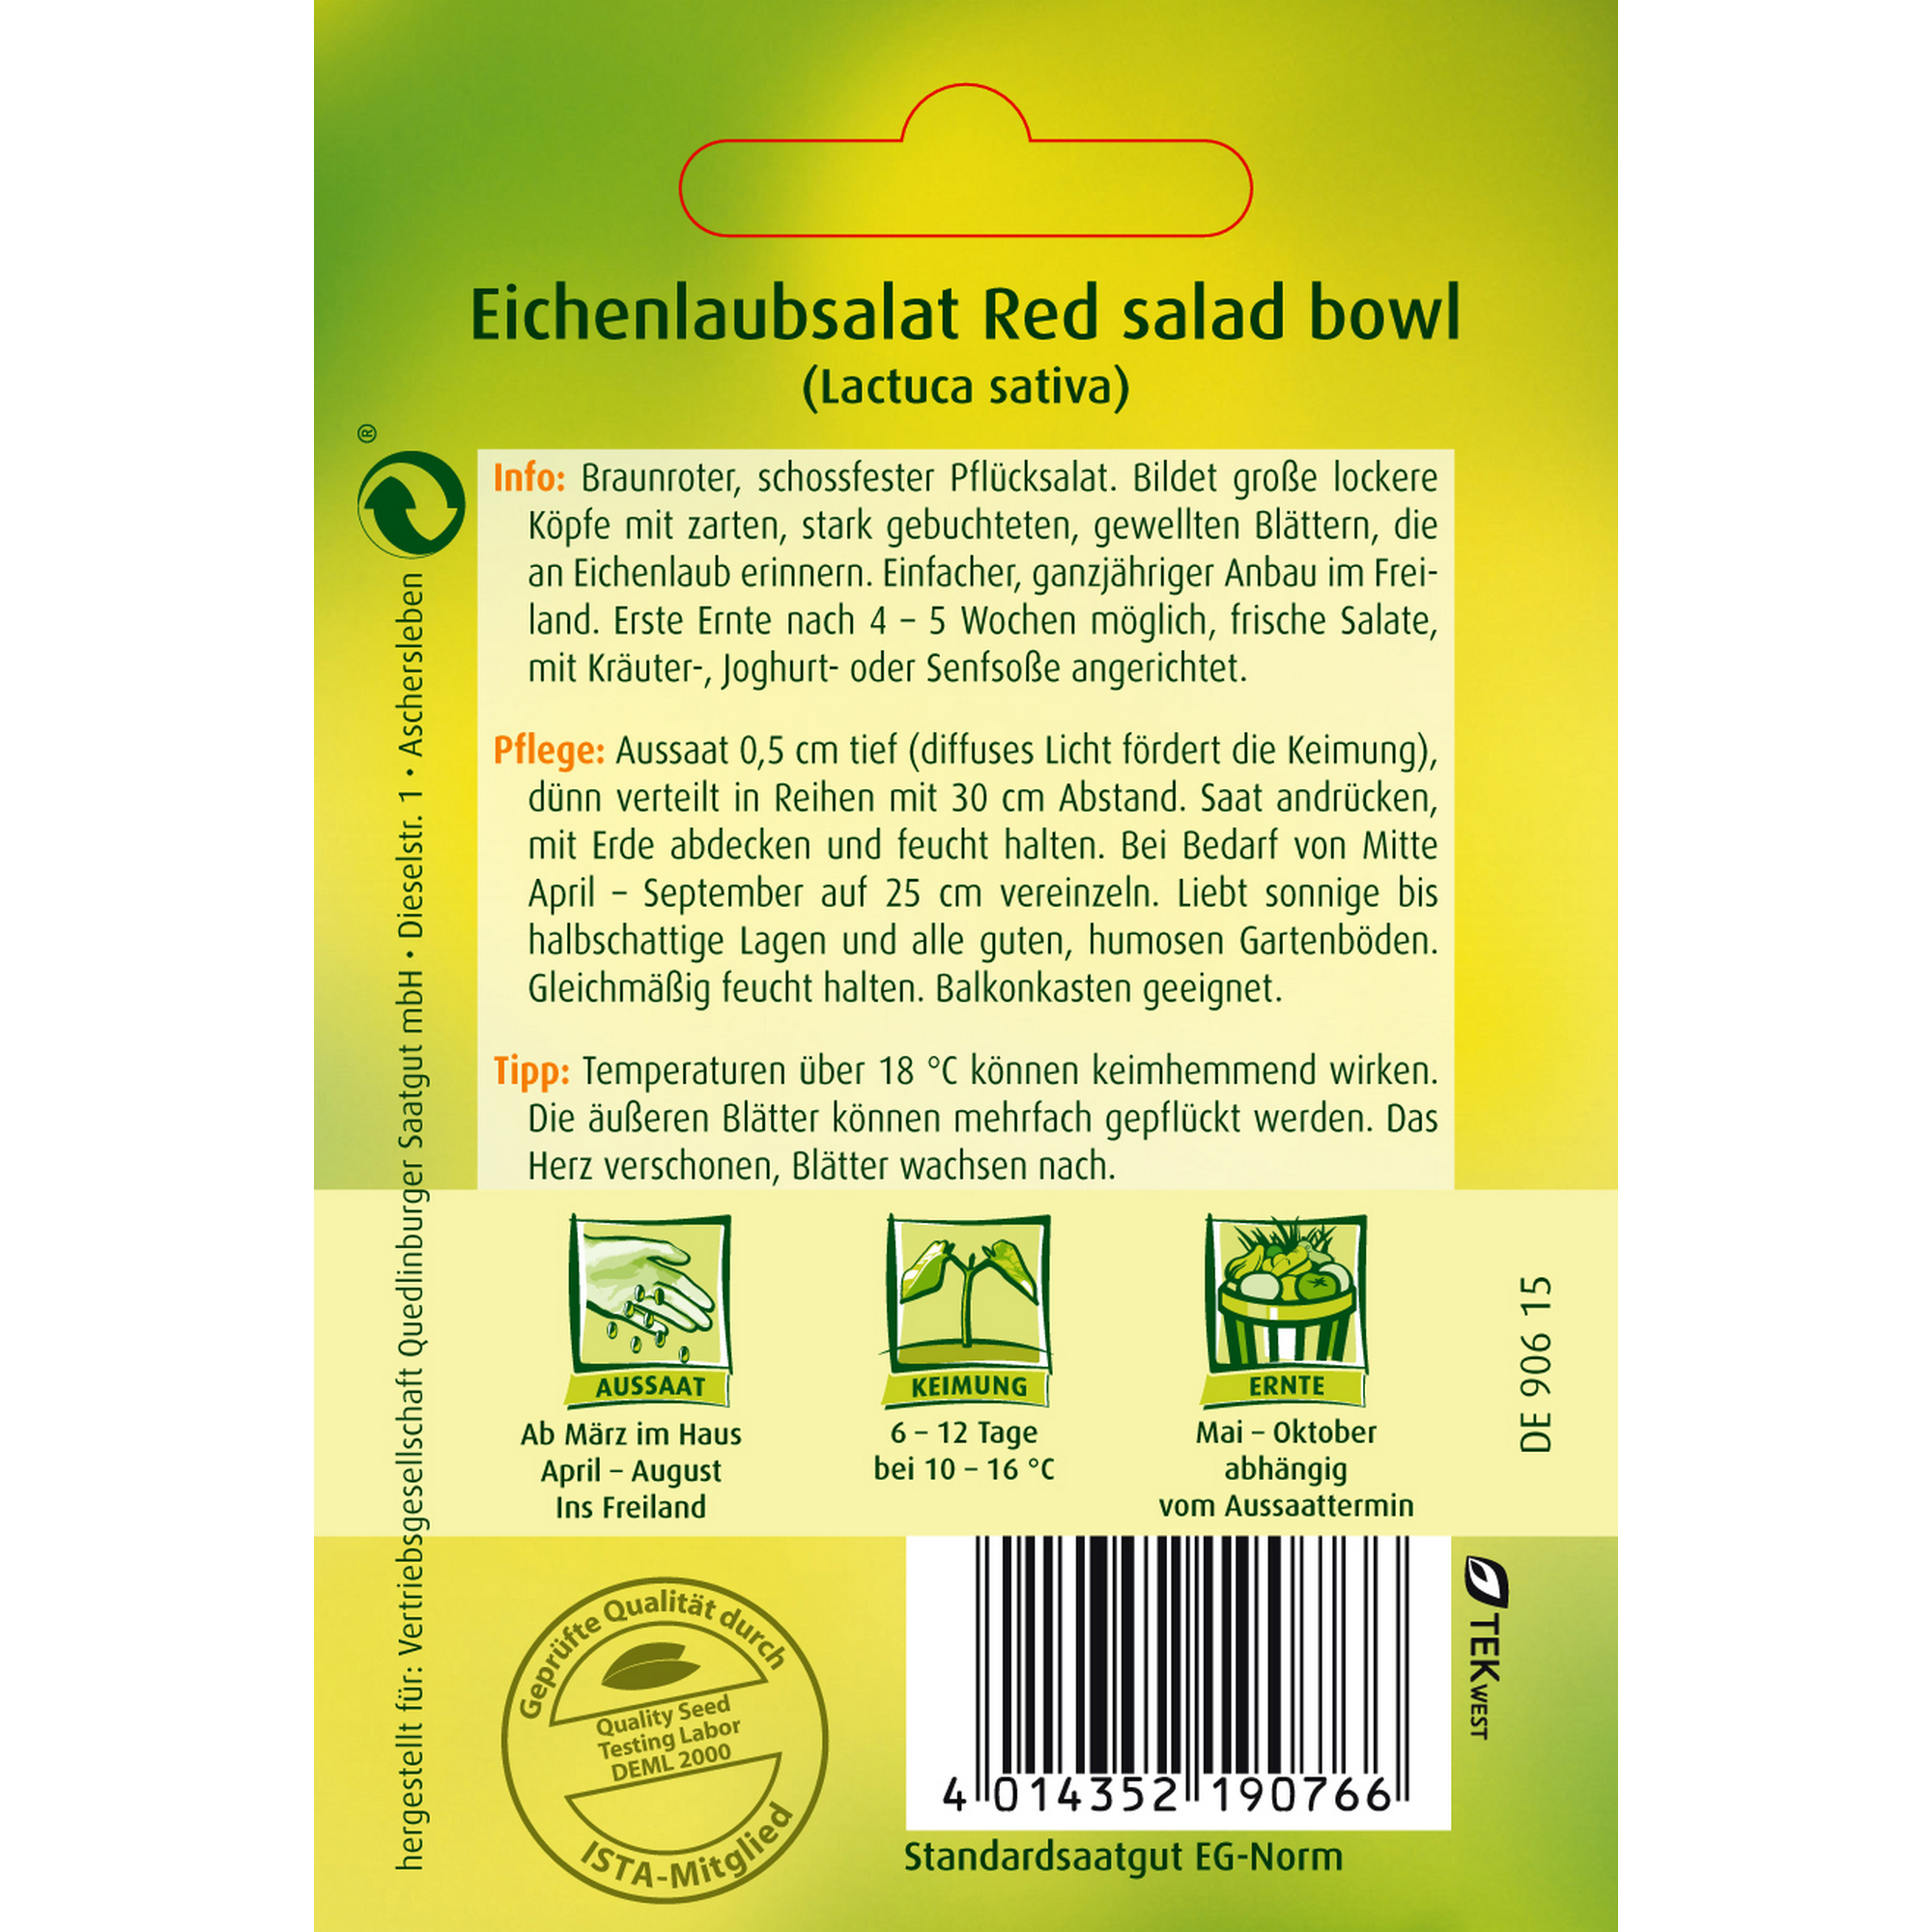 Eichenlaubsalat 'Red salad bowl' + product picture